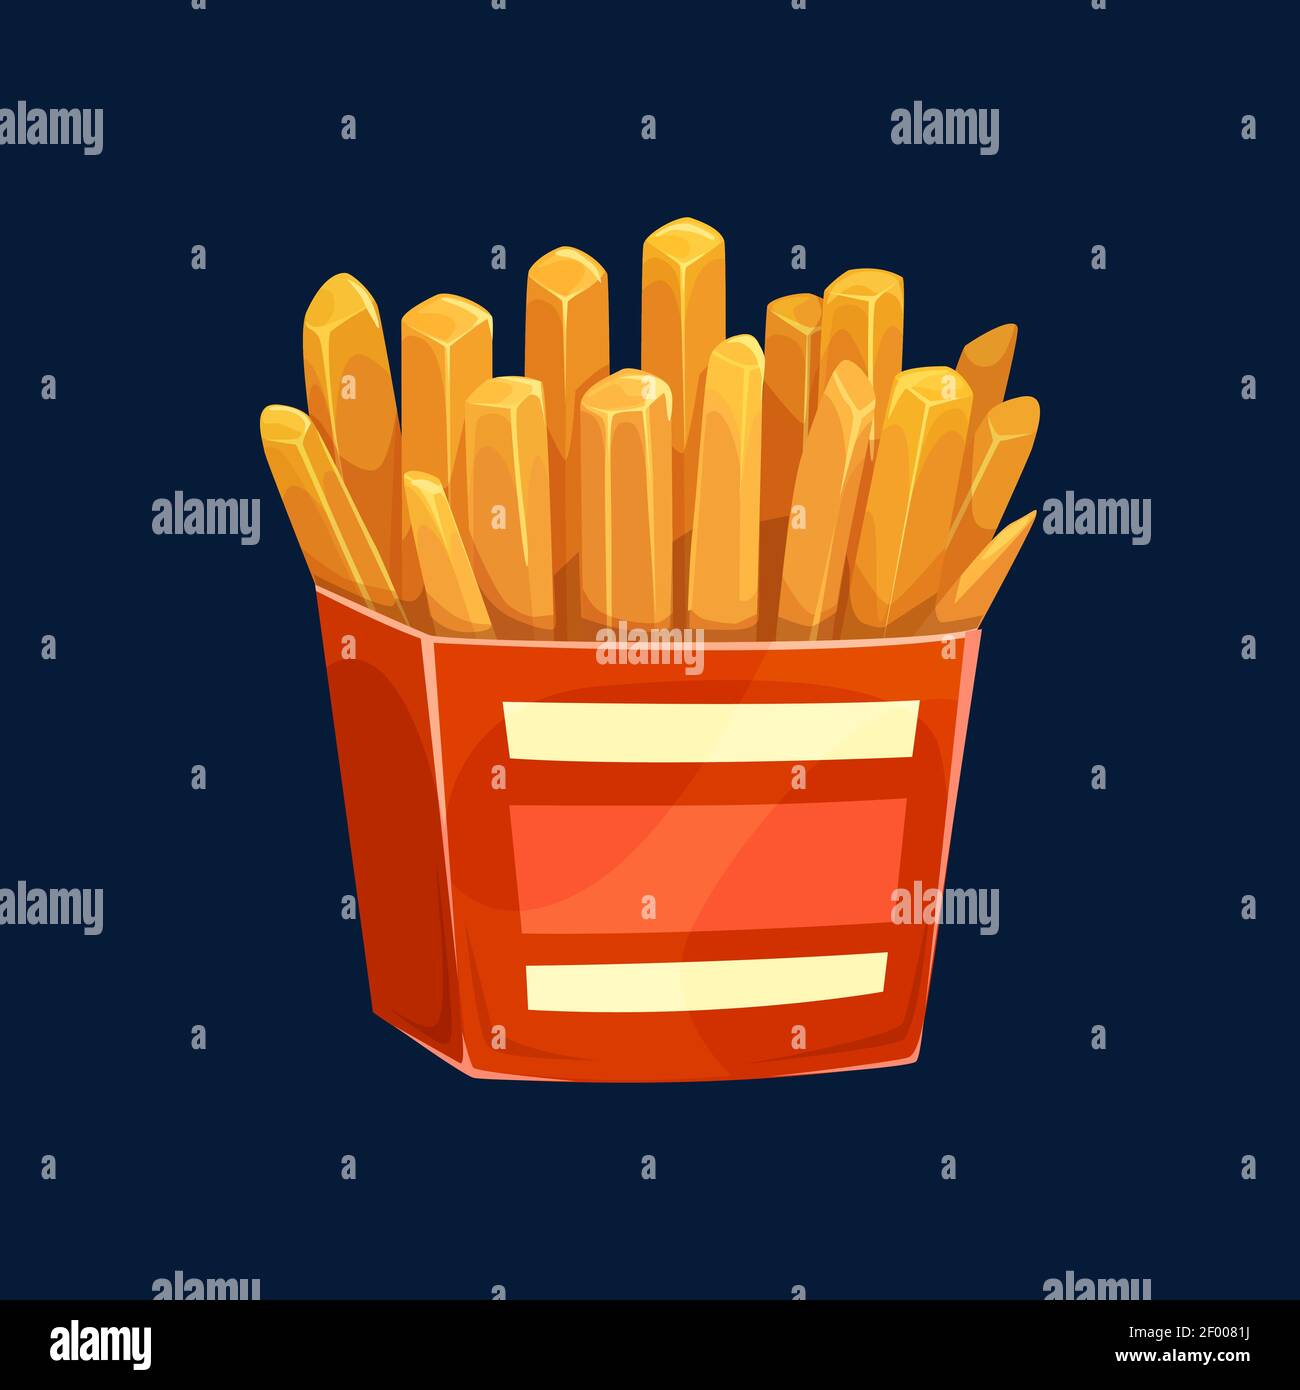 Fried potatoes in red box with white stripes isolated fastfood snack. Vector crispy fries with salt and paper, street takeaway food. French fries, tak Stock Vector